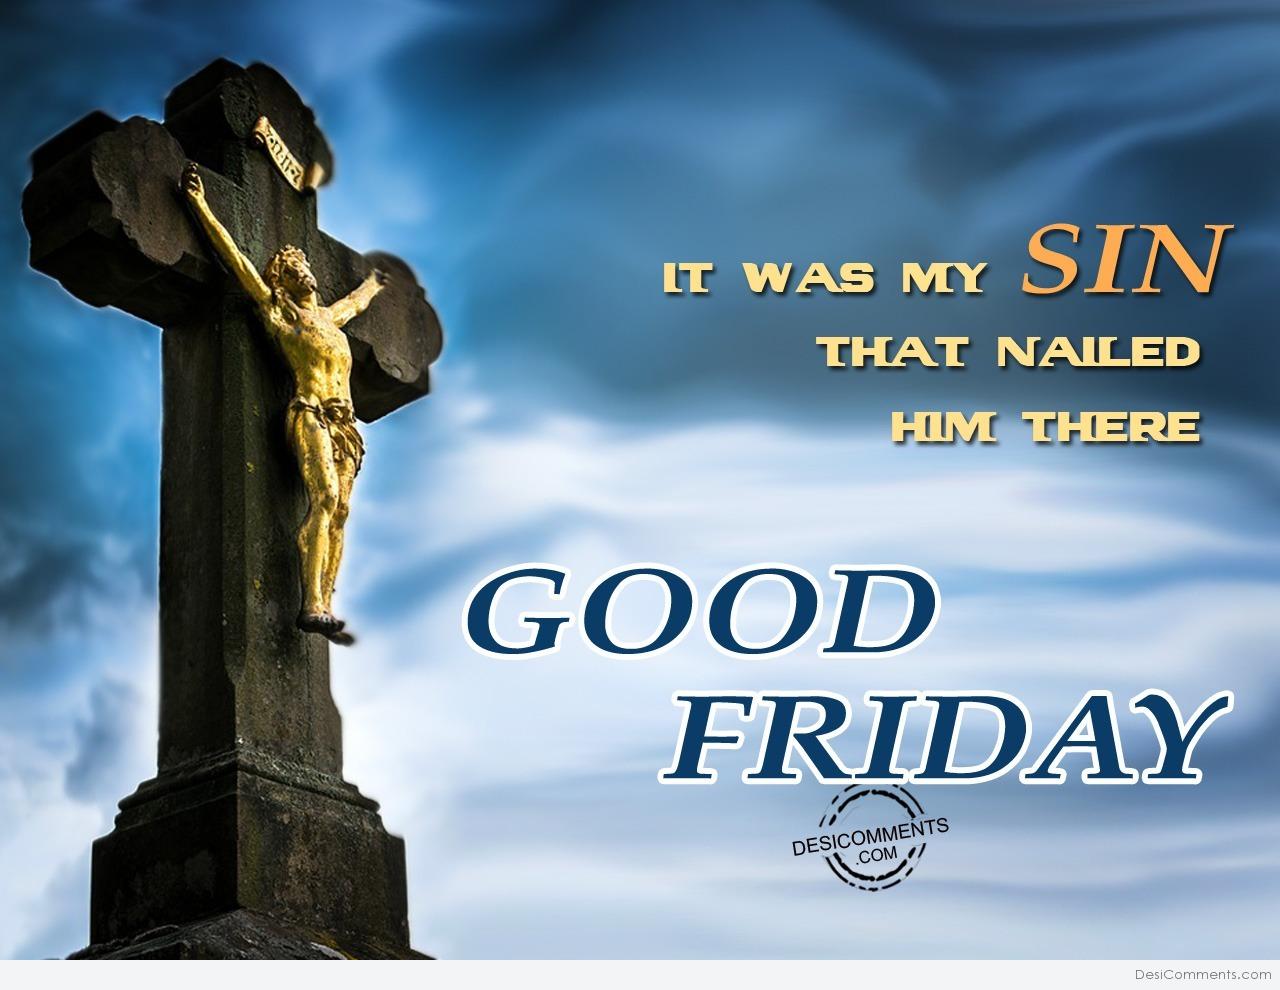 It was my sin that nailed him there, Good Friday - DesiComments.com